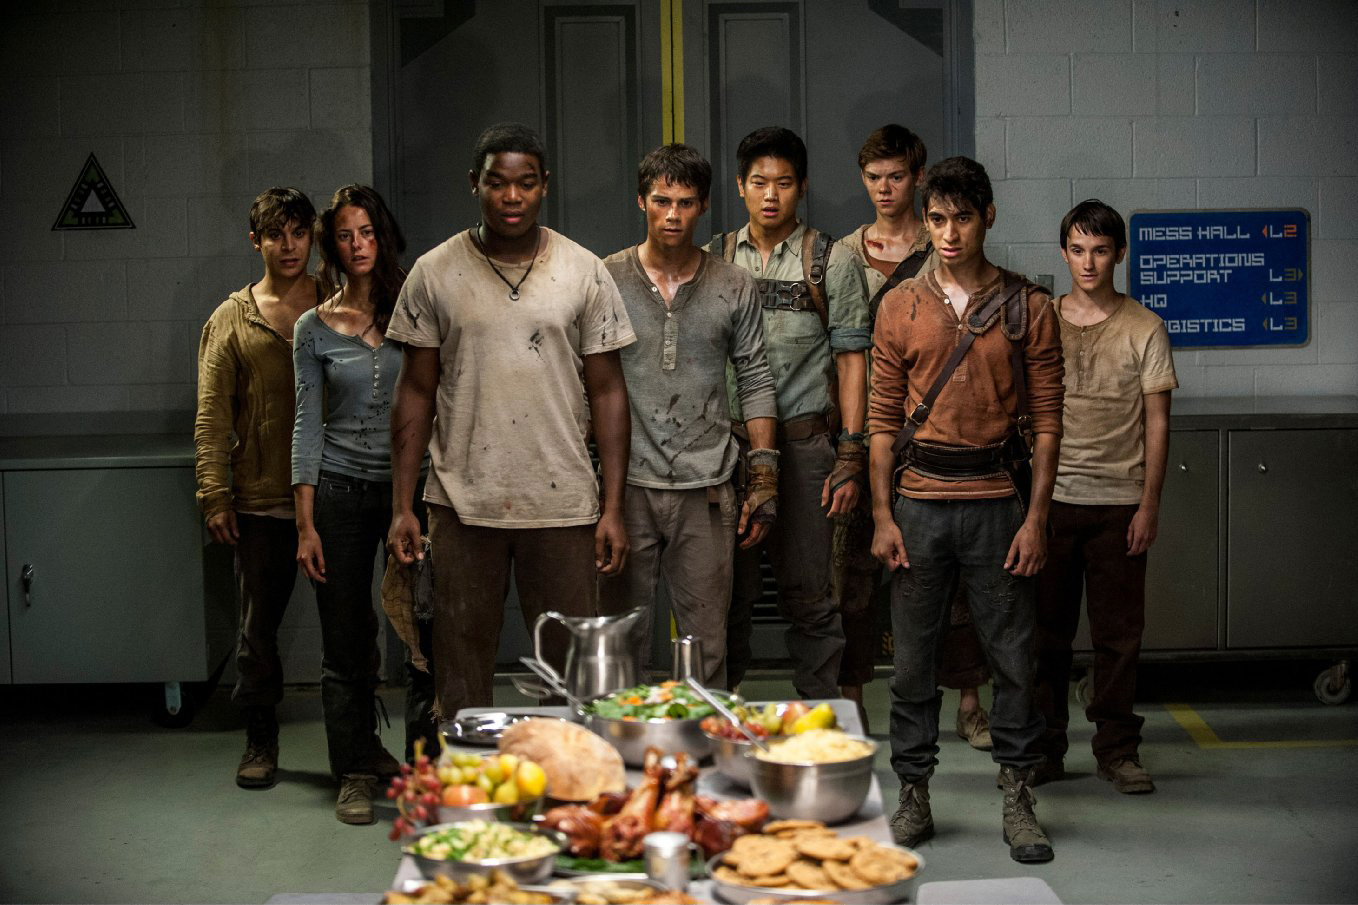 PHOTO: Dylan O'Brien, center, in a scene from "Maze Runner: The Scorch Trial."